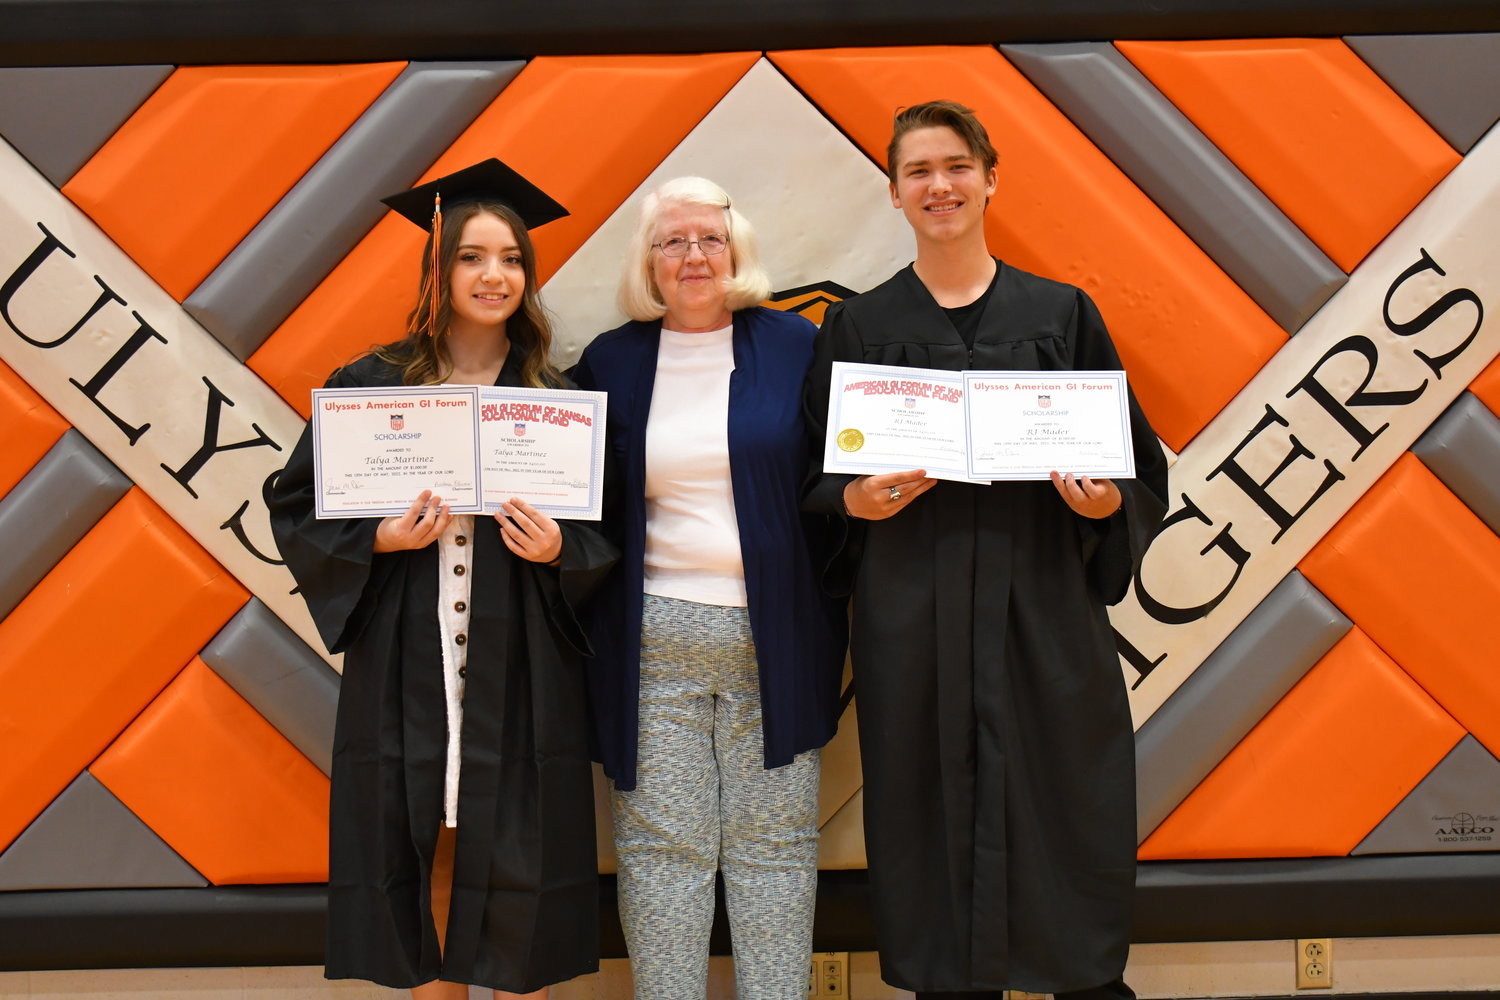 Senior Awards — Taiya Martinez and R.J. Mader were given the American GI Forum Scholarship by Barb Olivas on Friday, May 13, 2022.